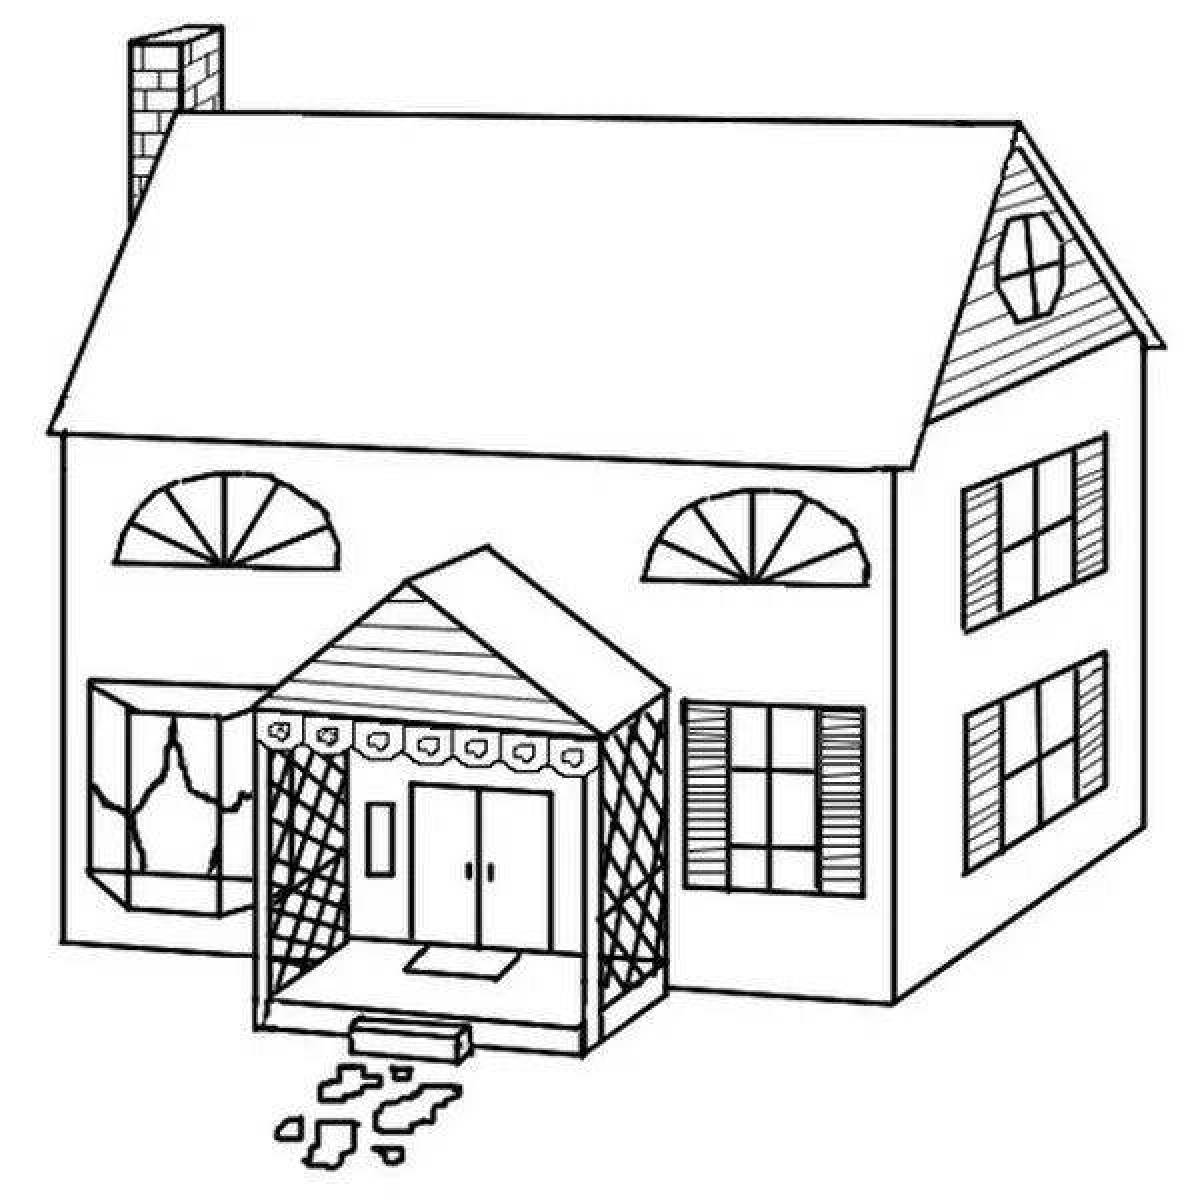 Exquisite big house coloring book